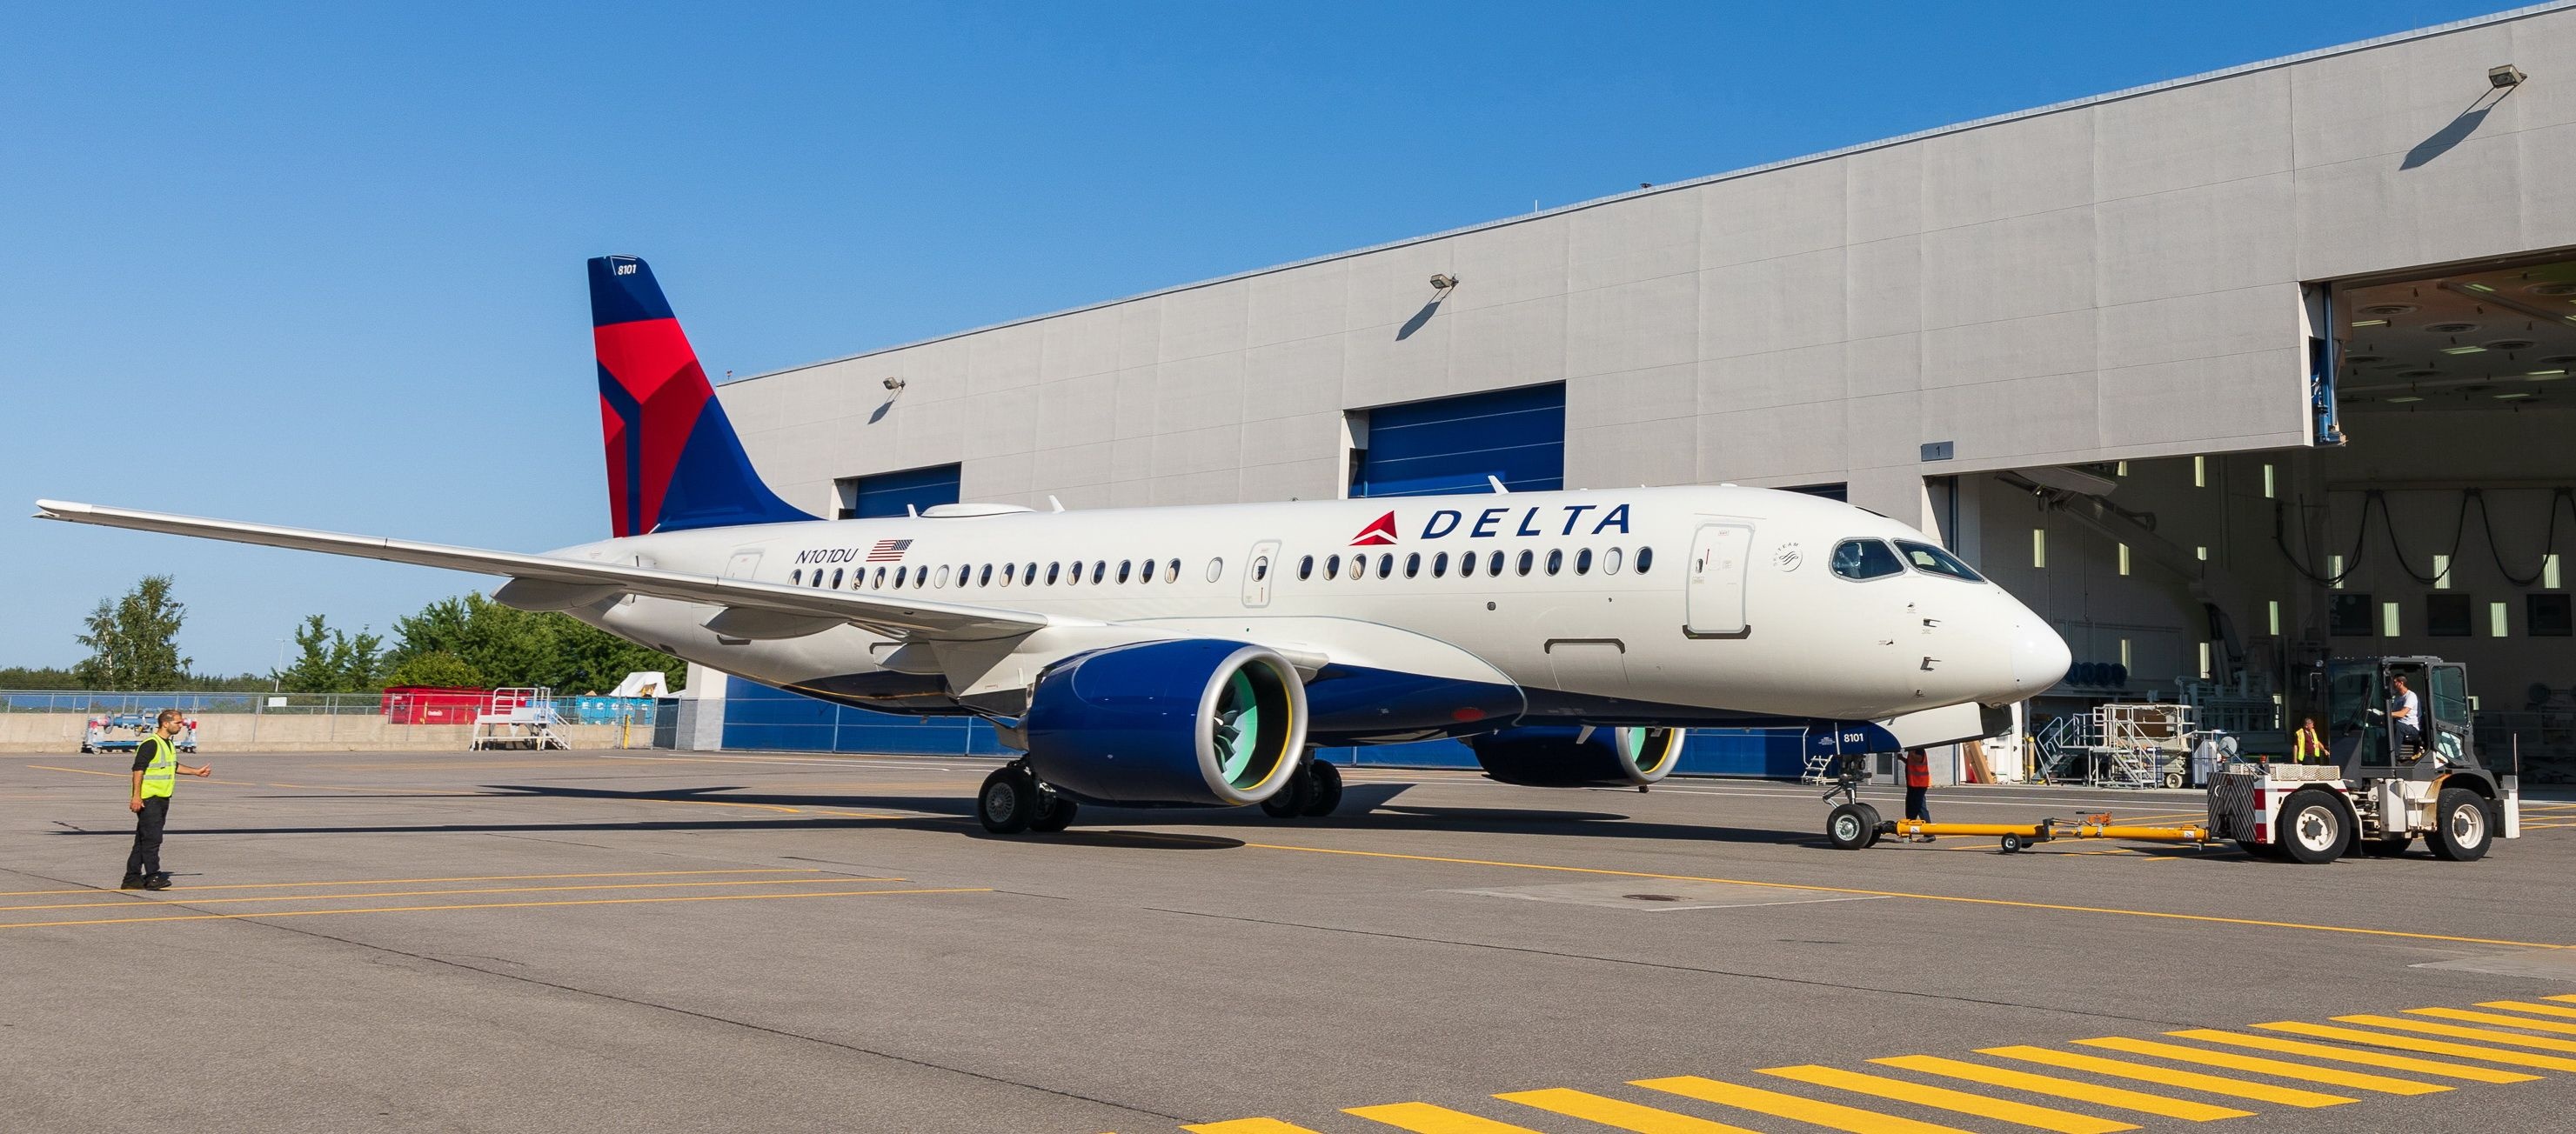 Airbus A220, Delta's first A220, Final assembly in Mirabel, Delta's first A220, 2970x1310 Dual Screen Desktop